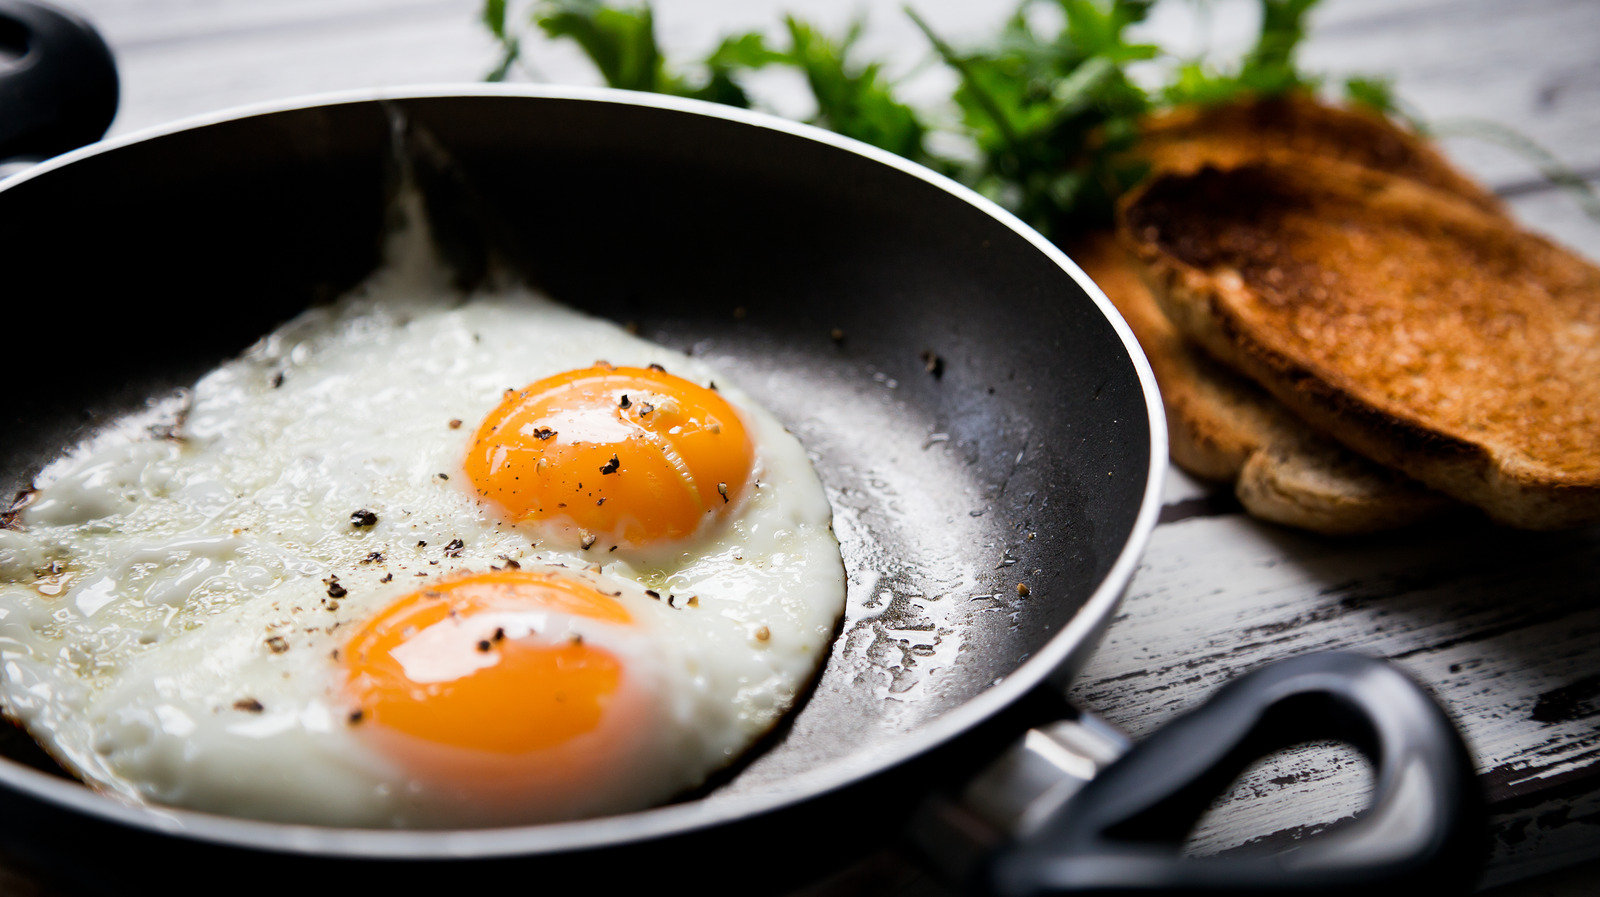 The 8 Best Pans For Frying Eggs